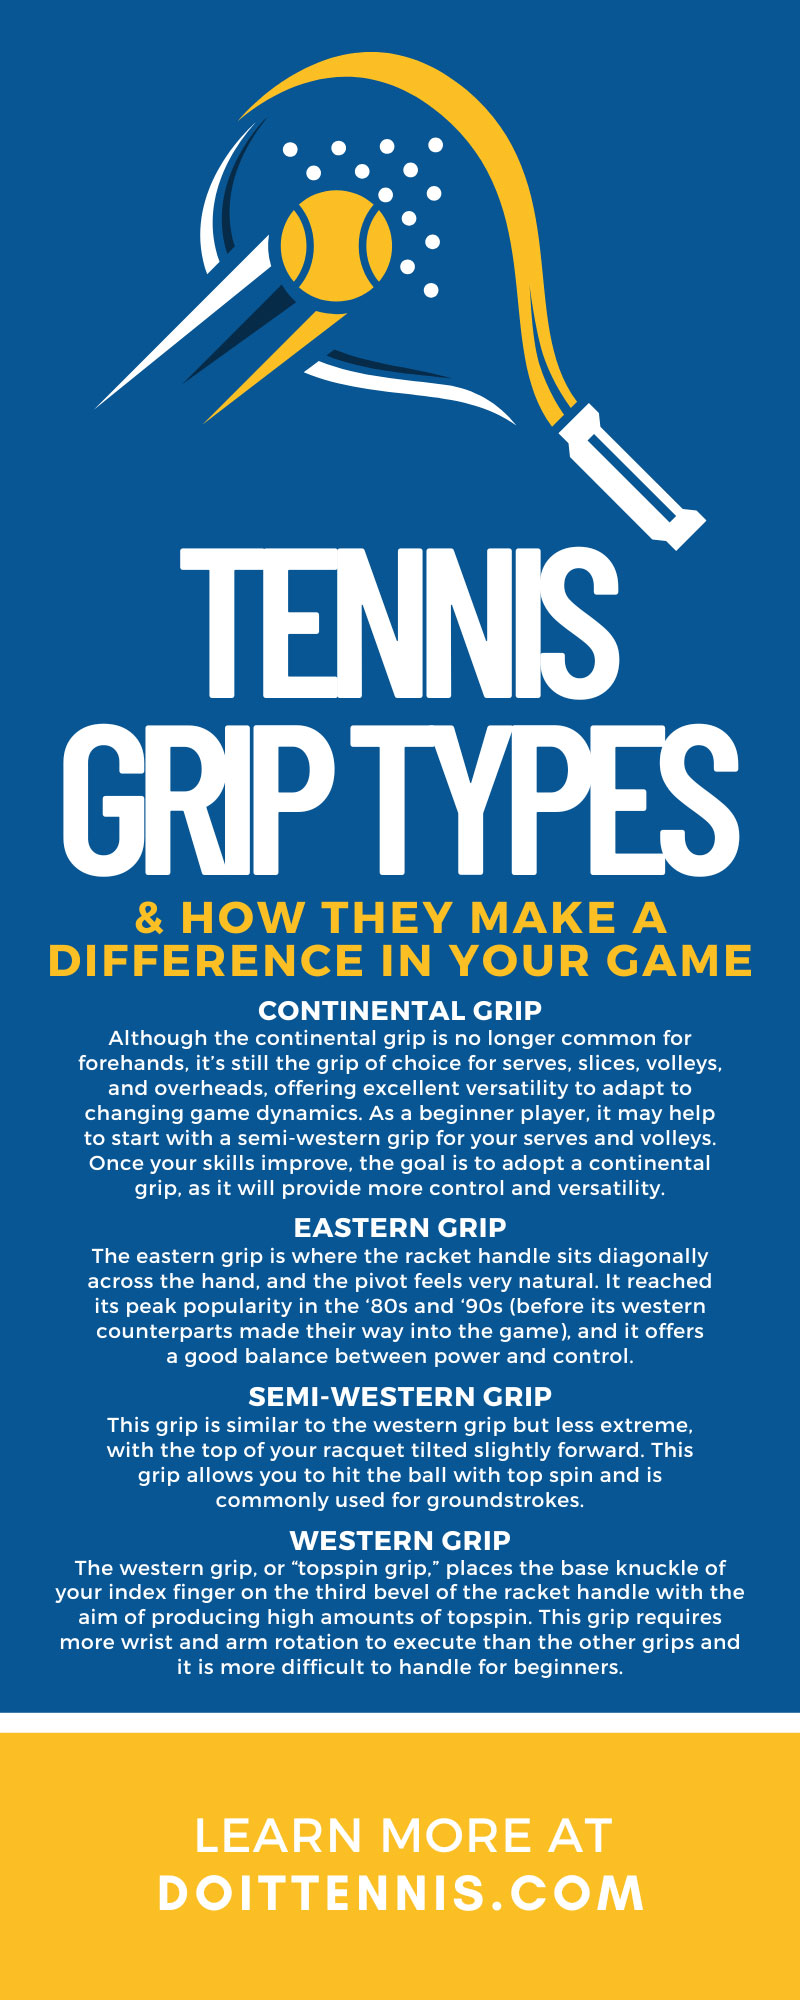 Tennis Grip Types & How They Make a Difference in Your Game